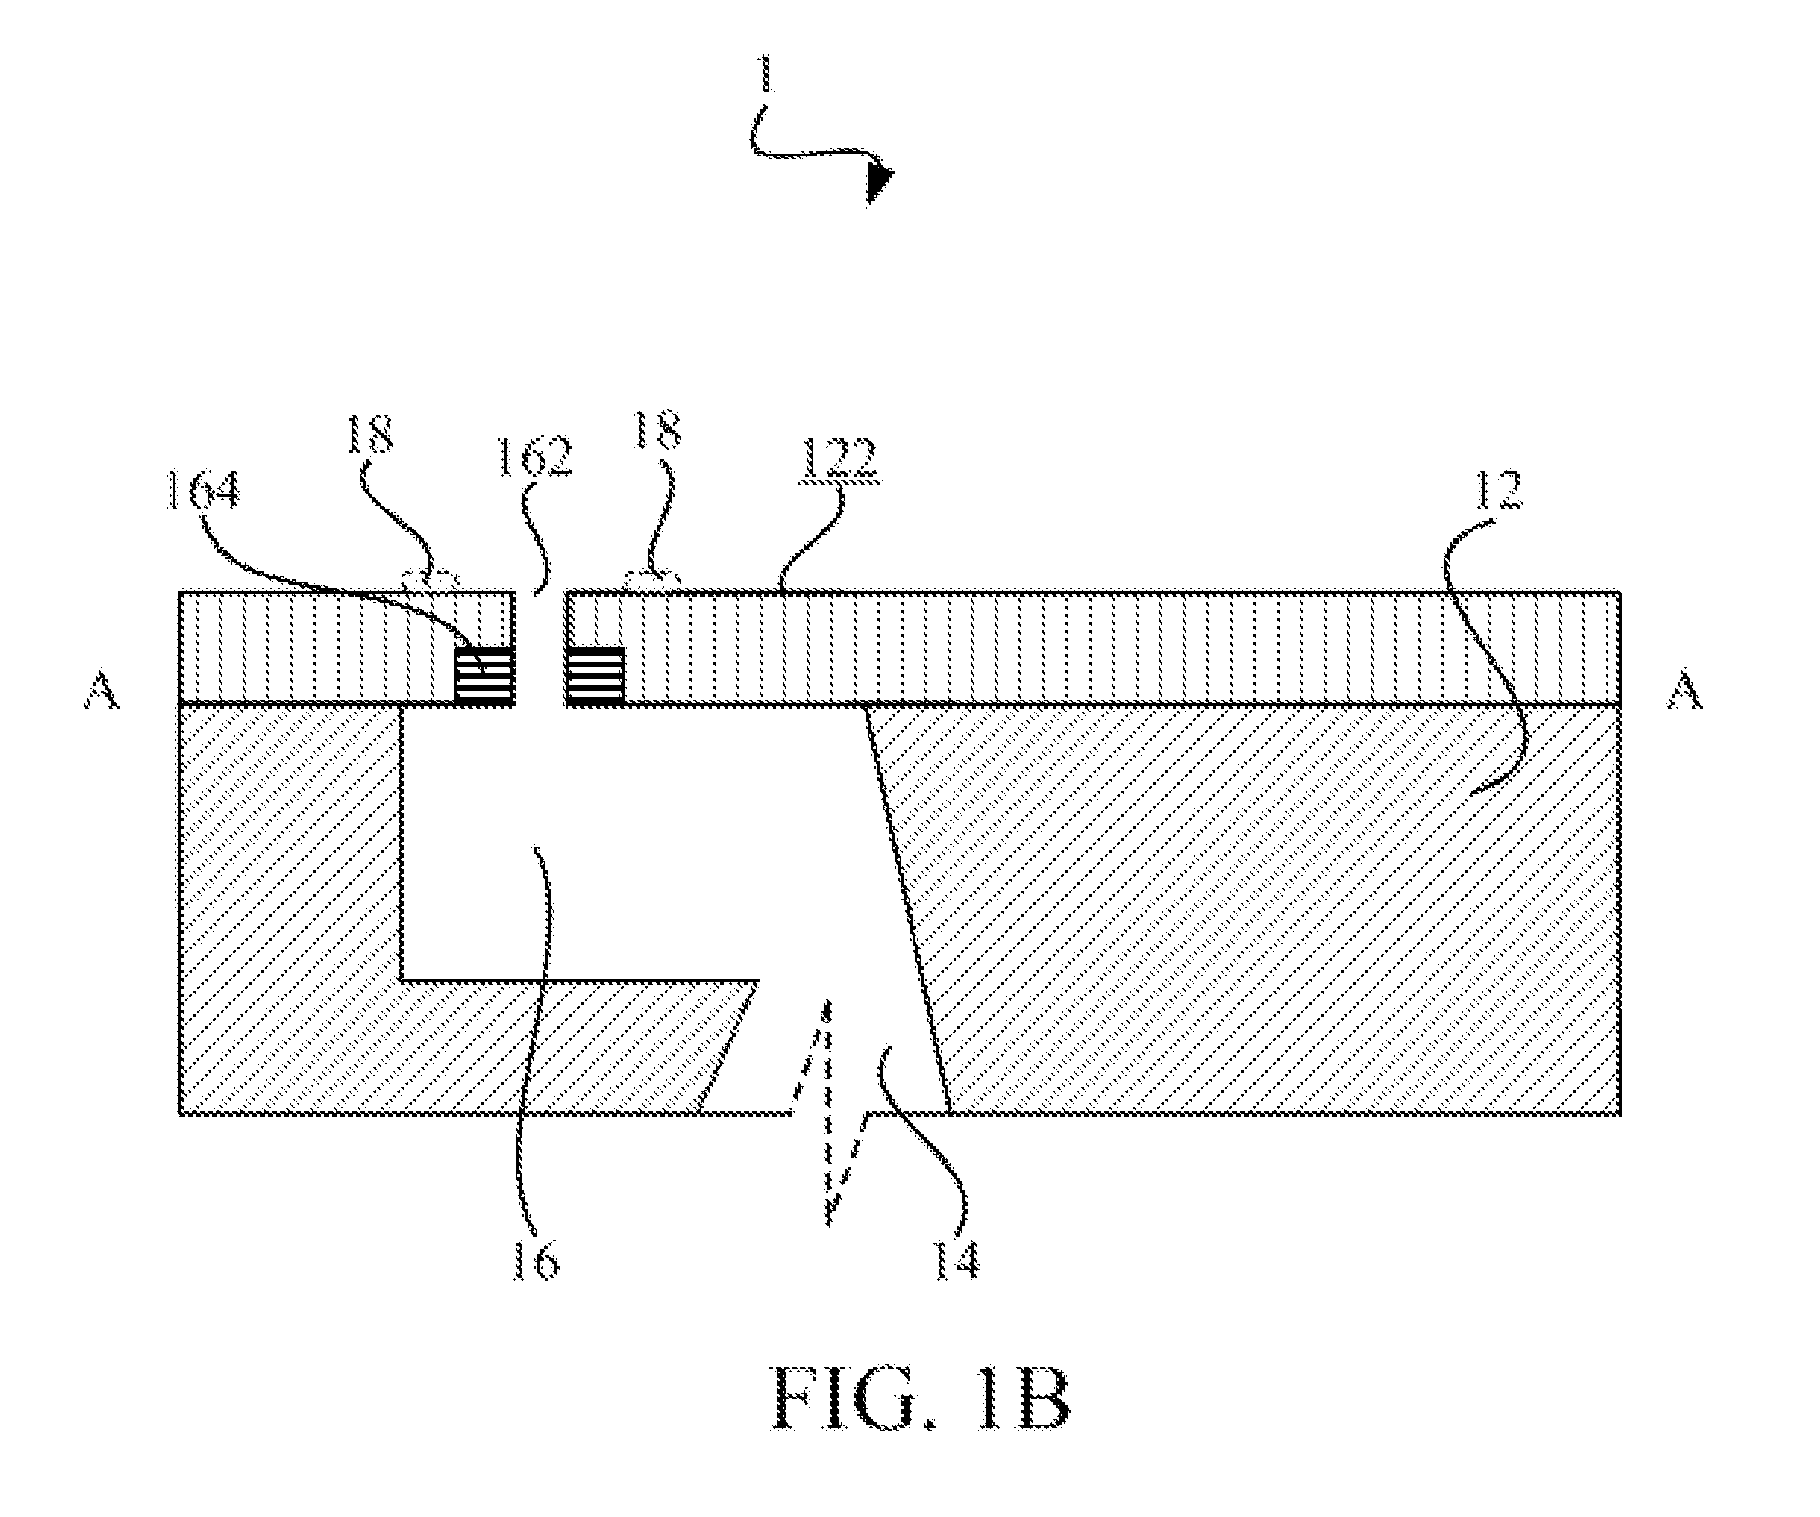 Microinjection apparatus with thermochromic indicator